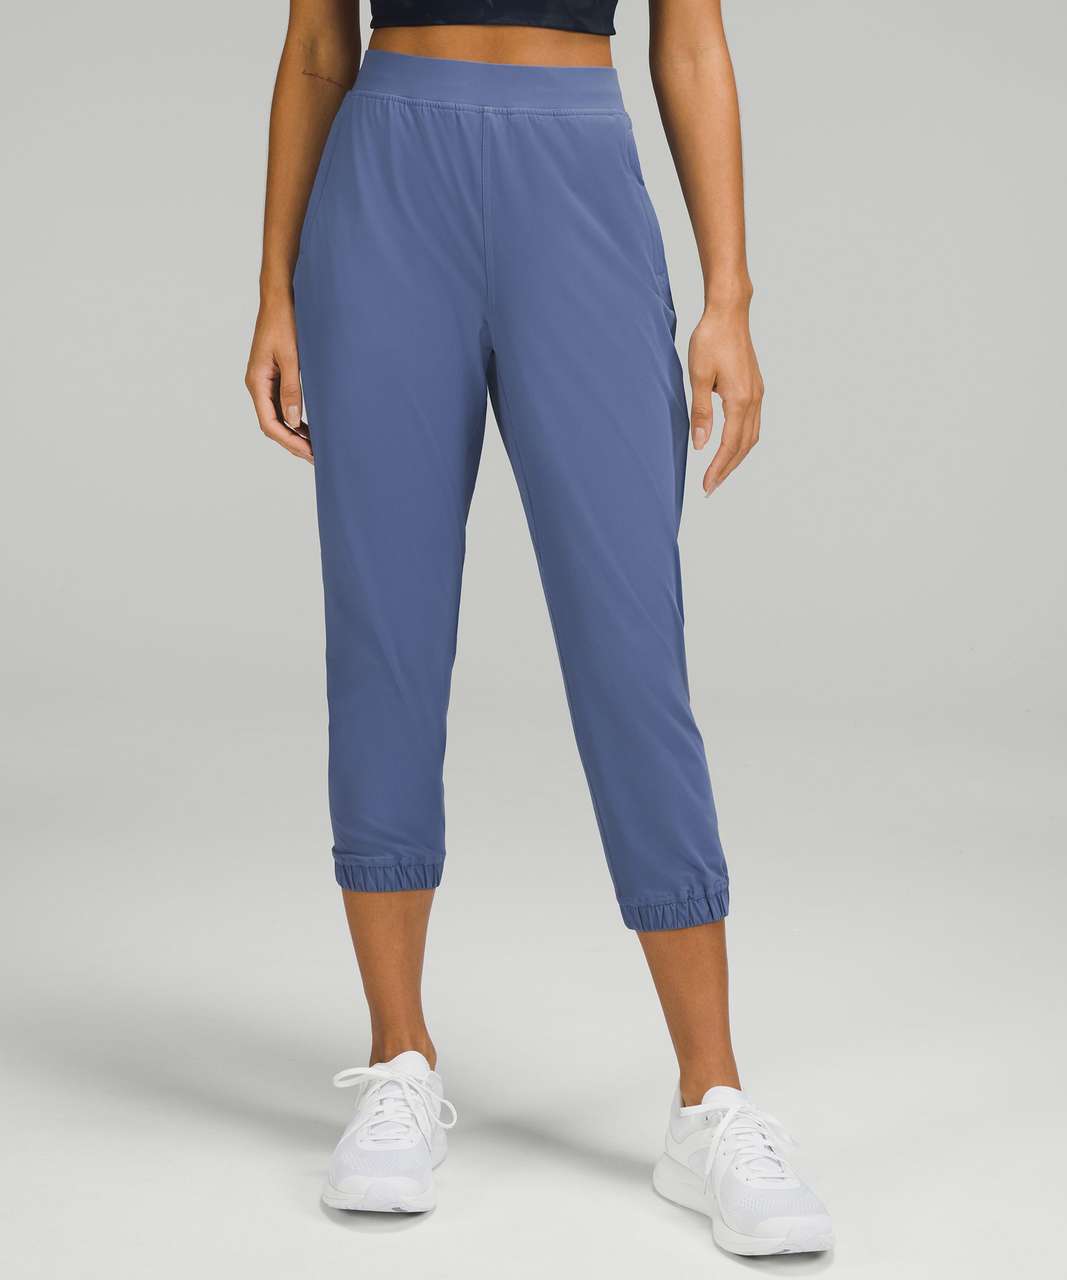 Lululemon Adapted State High-Rise Cropped Jogger 23 - Water Drop